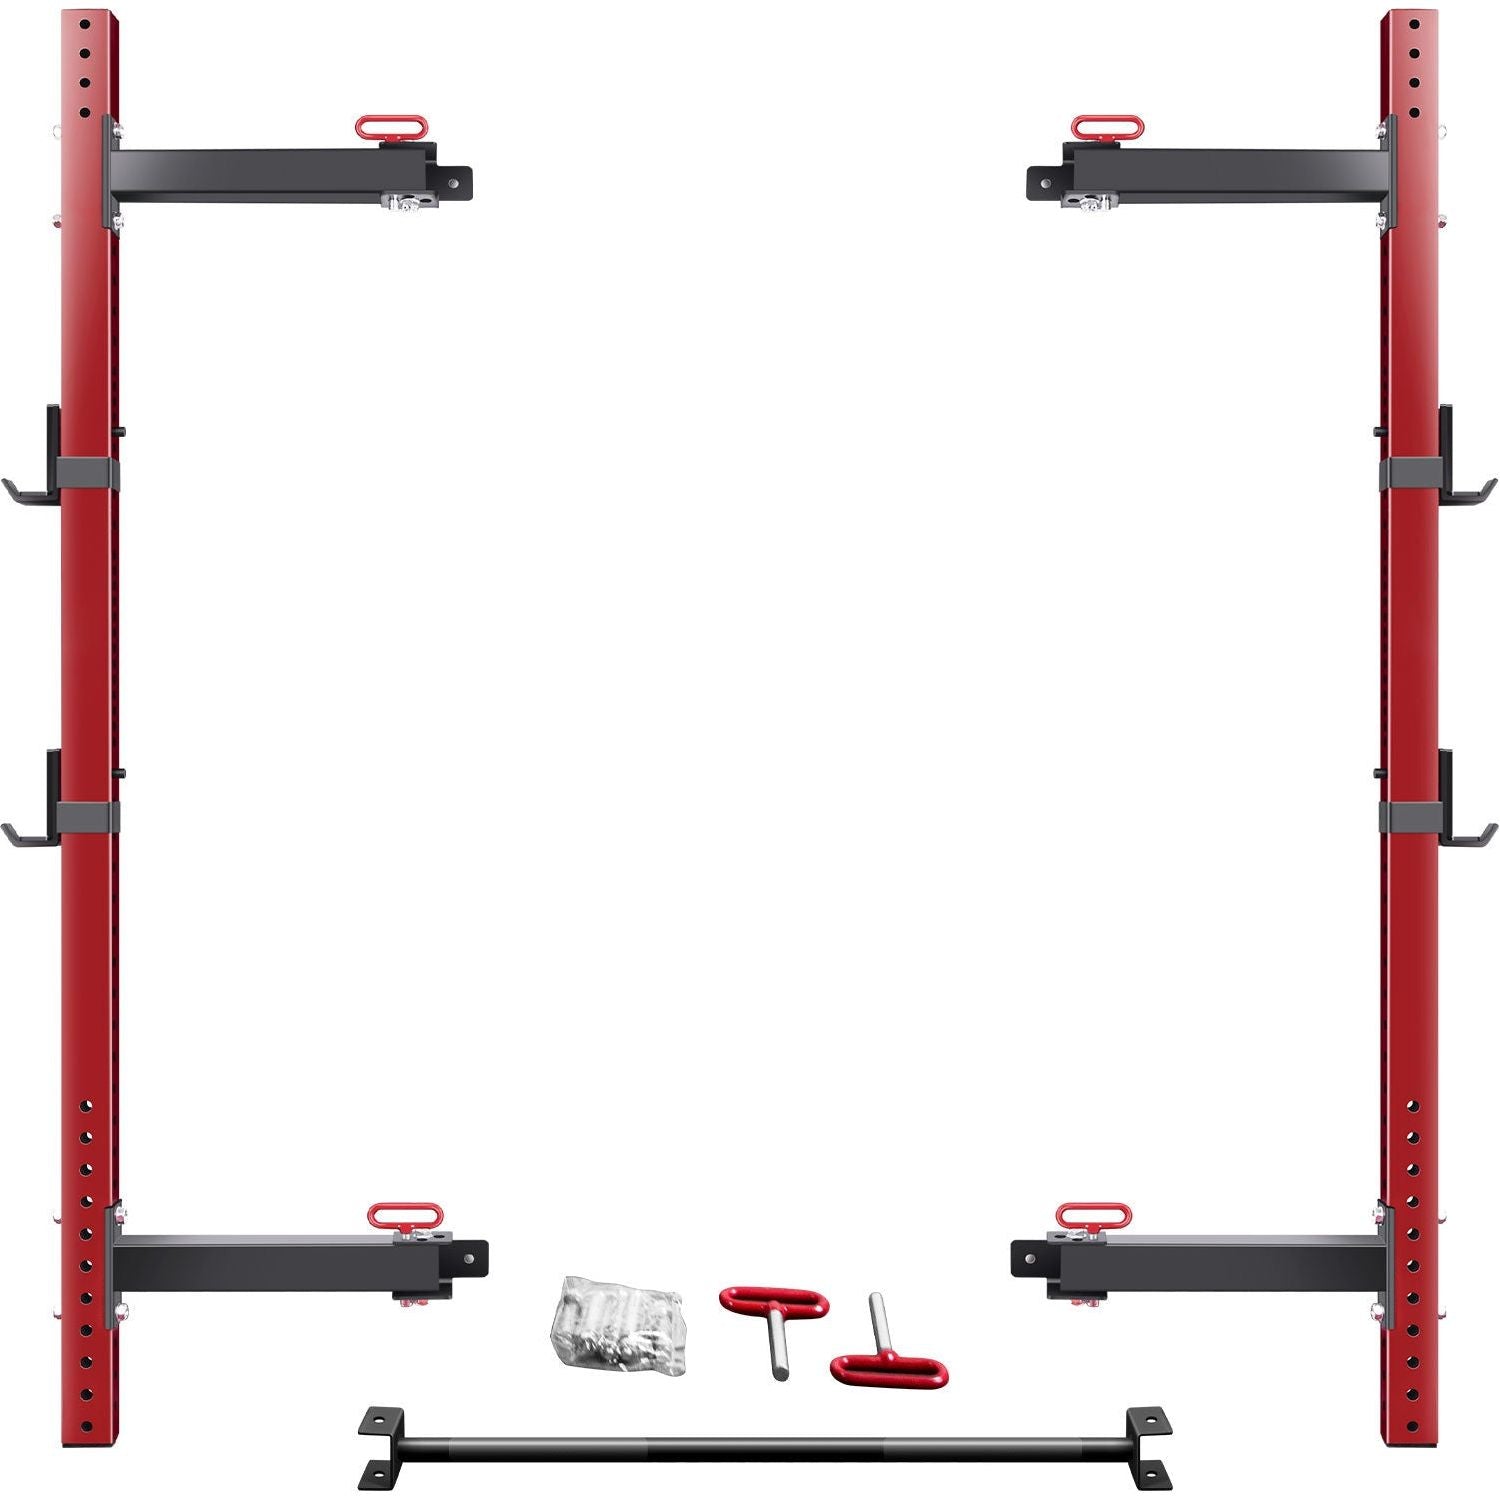 Folding Squat Power Rack for 1000lbs capacity with Pull Up Bar and J Cups